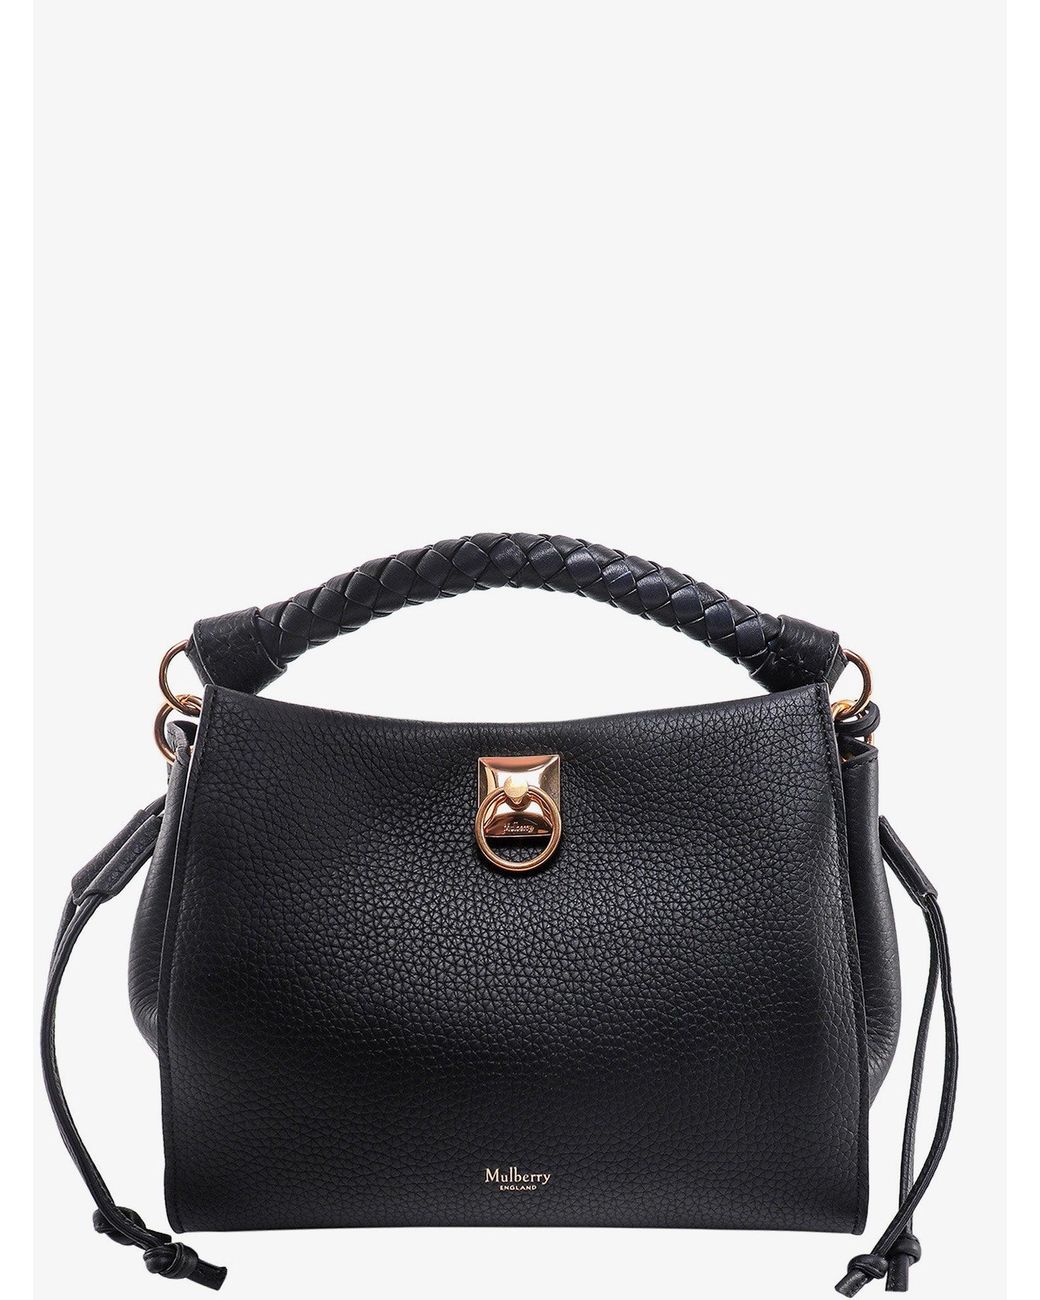 Mulberry Leather Handbags in Black | Lyst